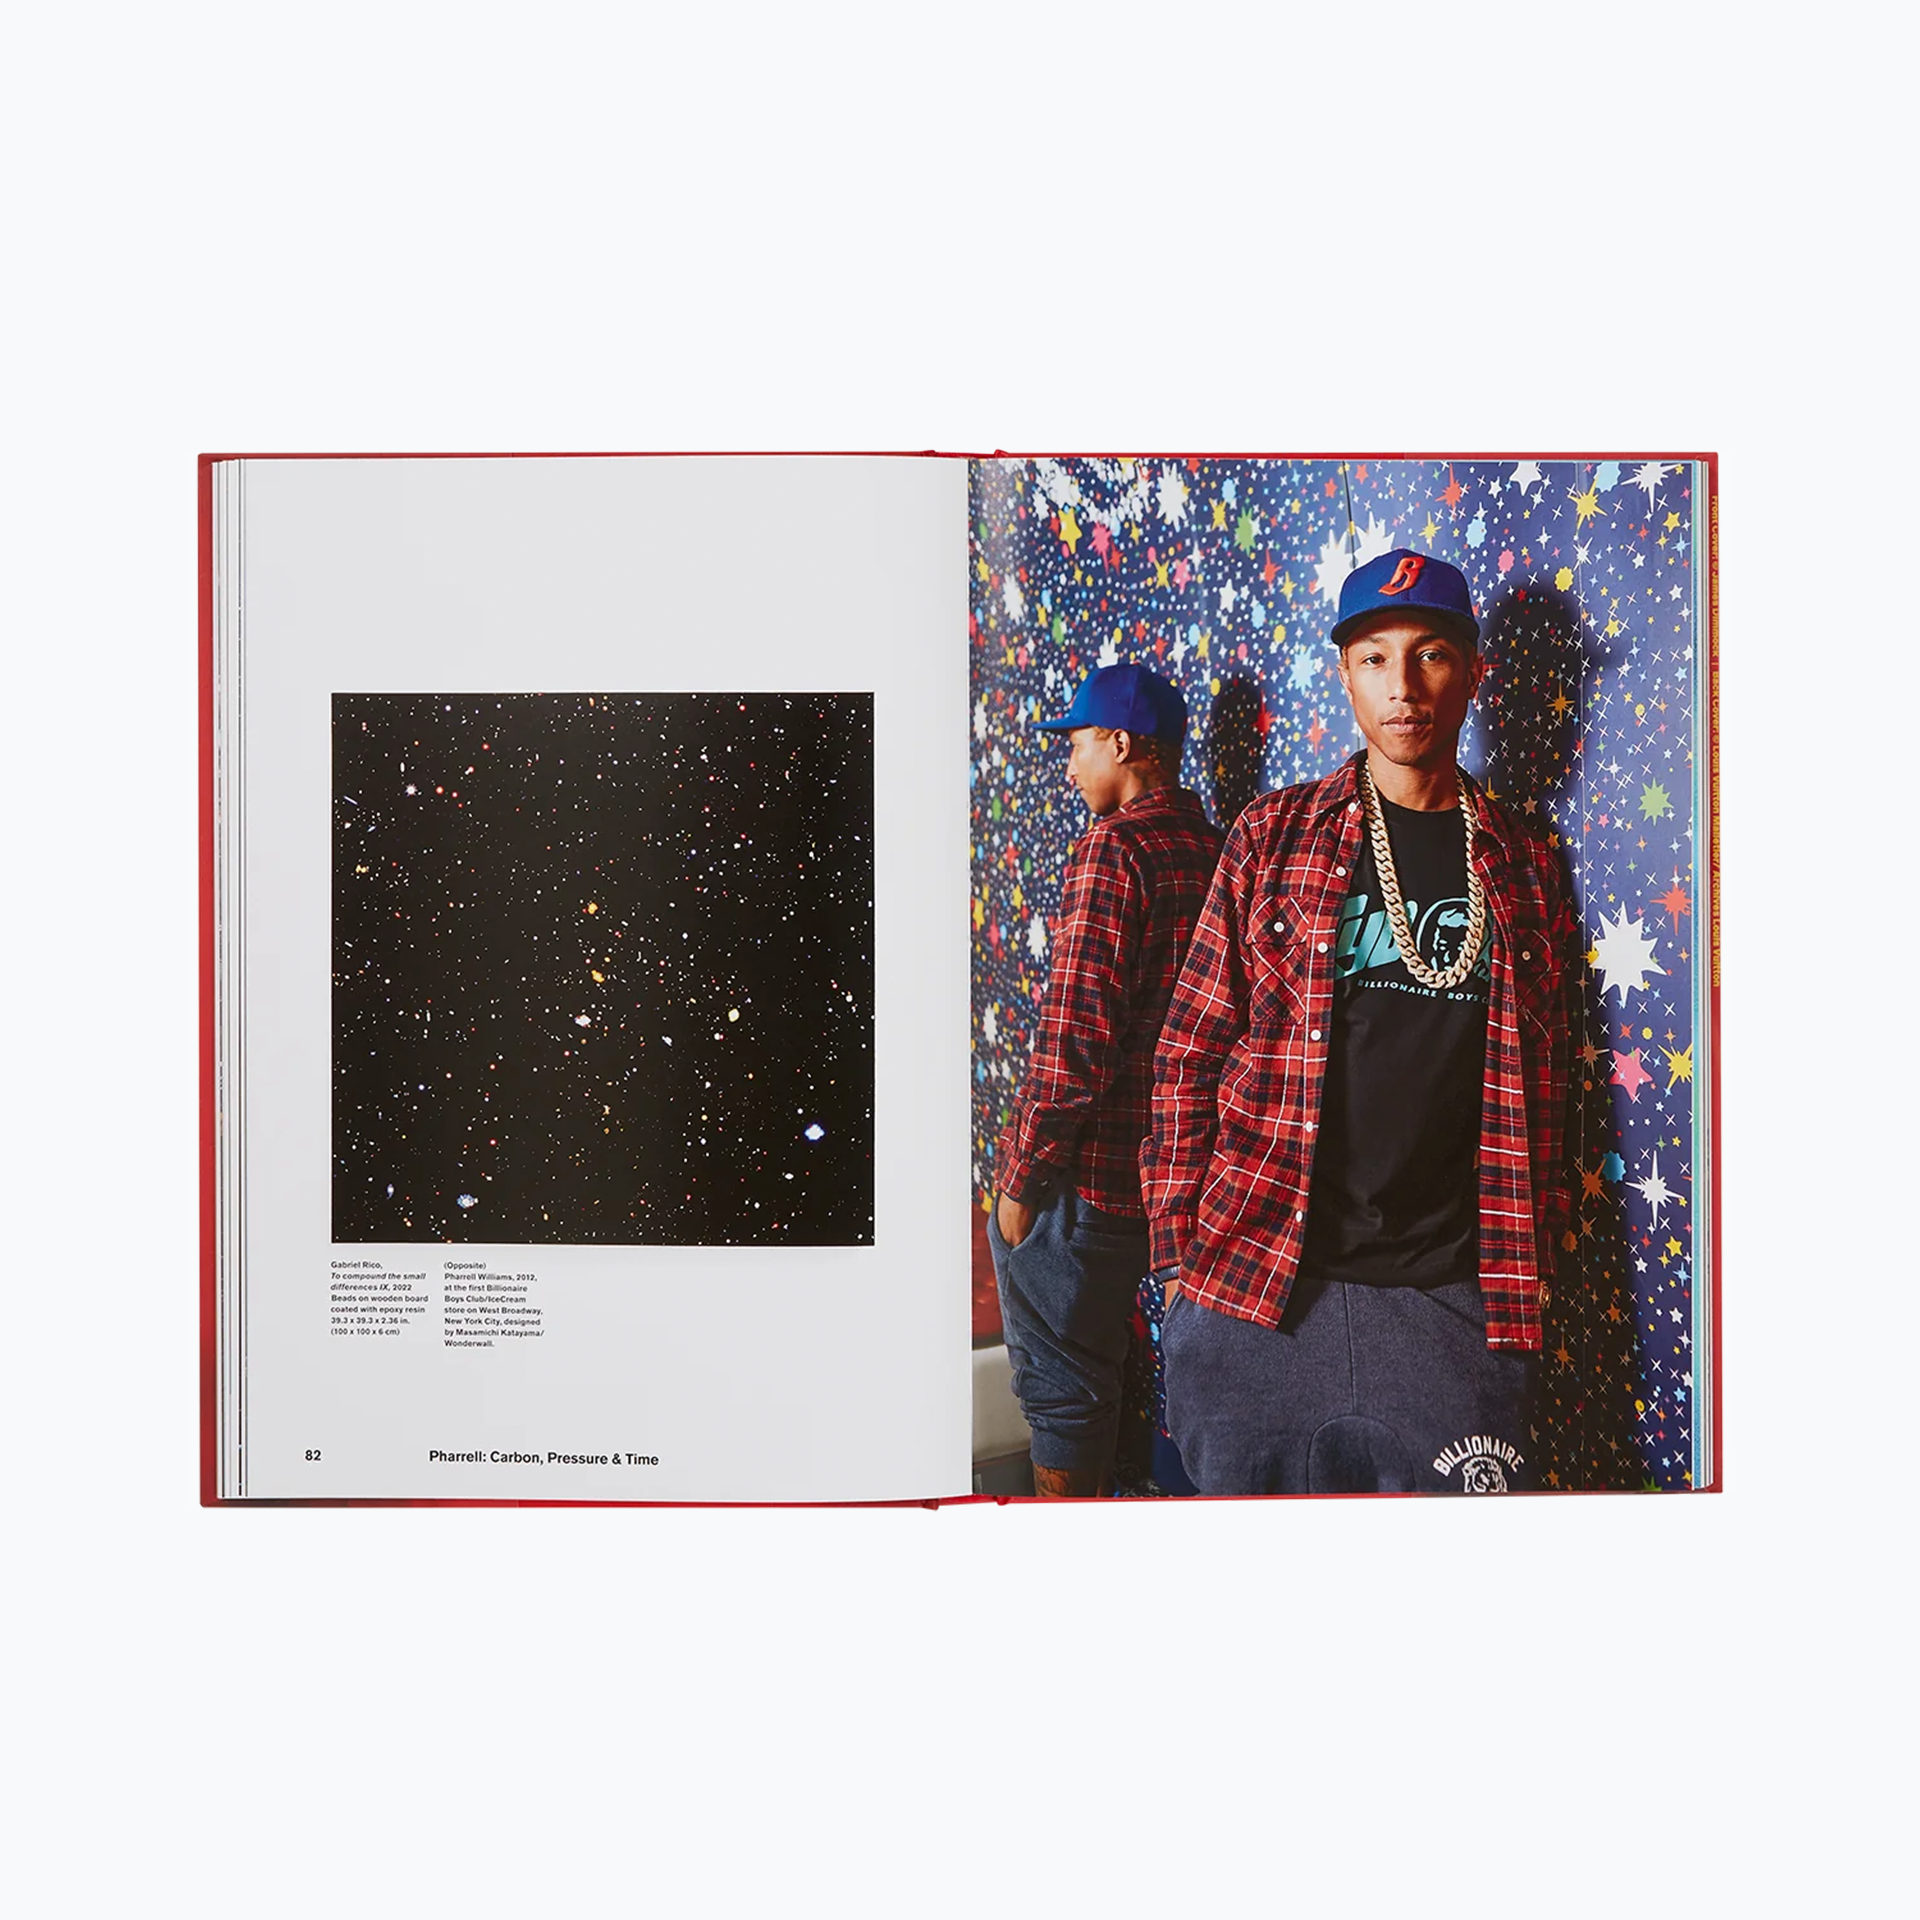 Pharrell - 'Carbon, Pressure & Time : A Book of Jewels'